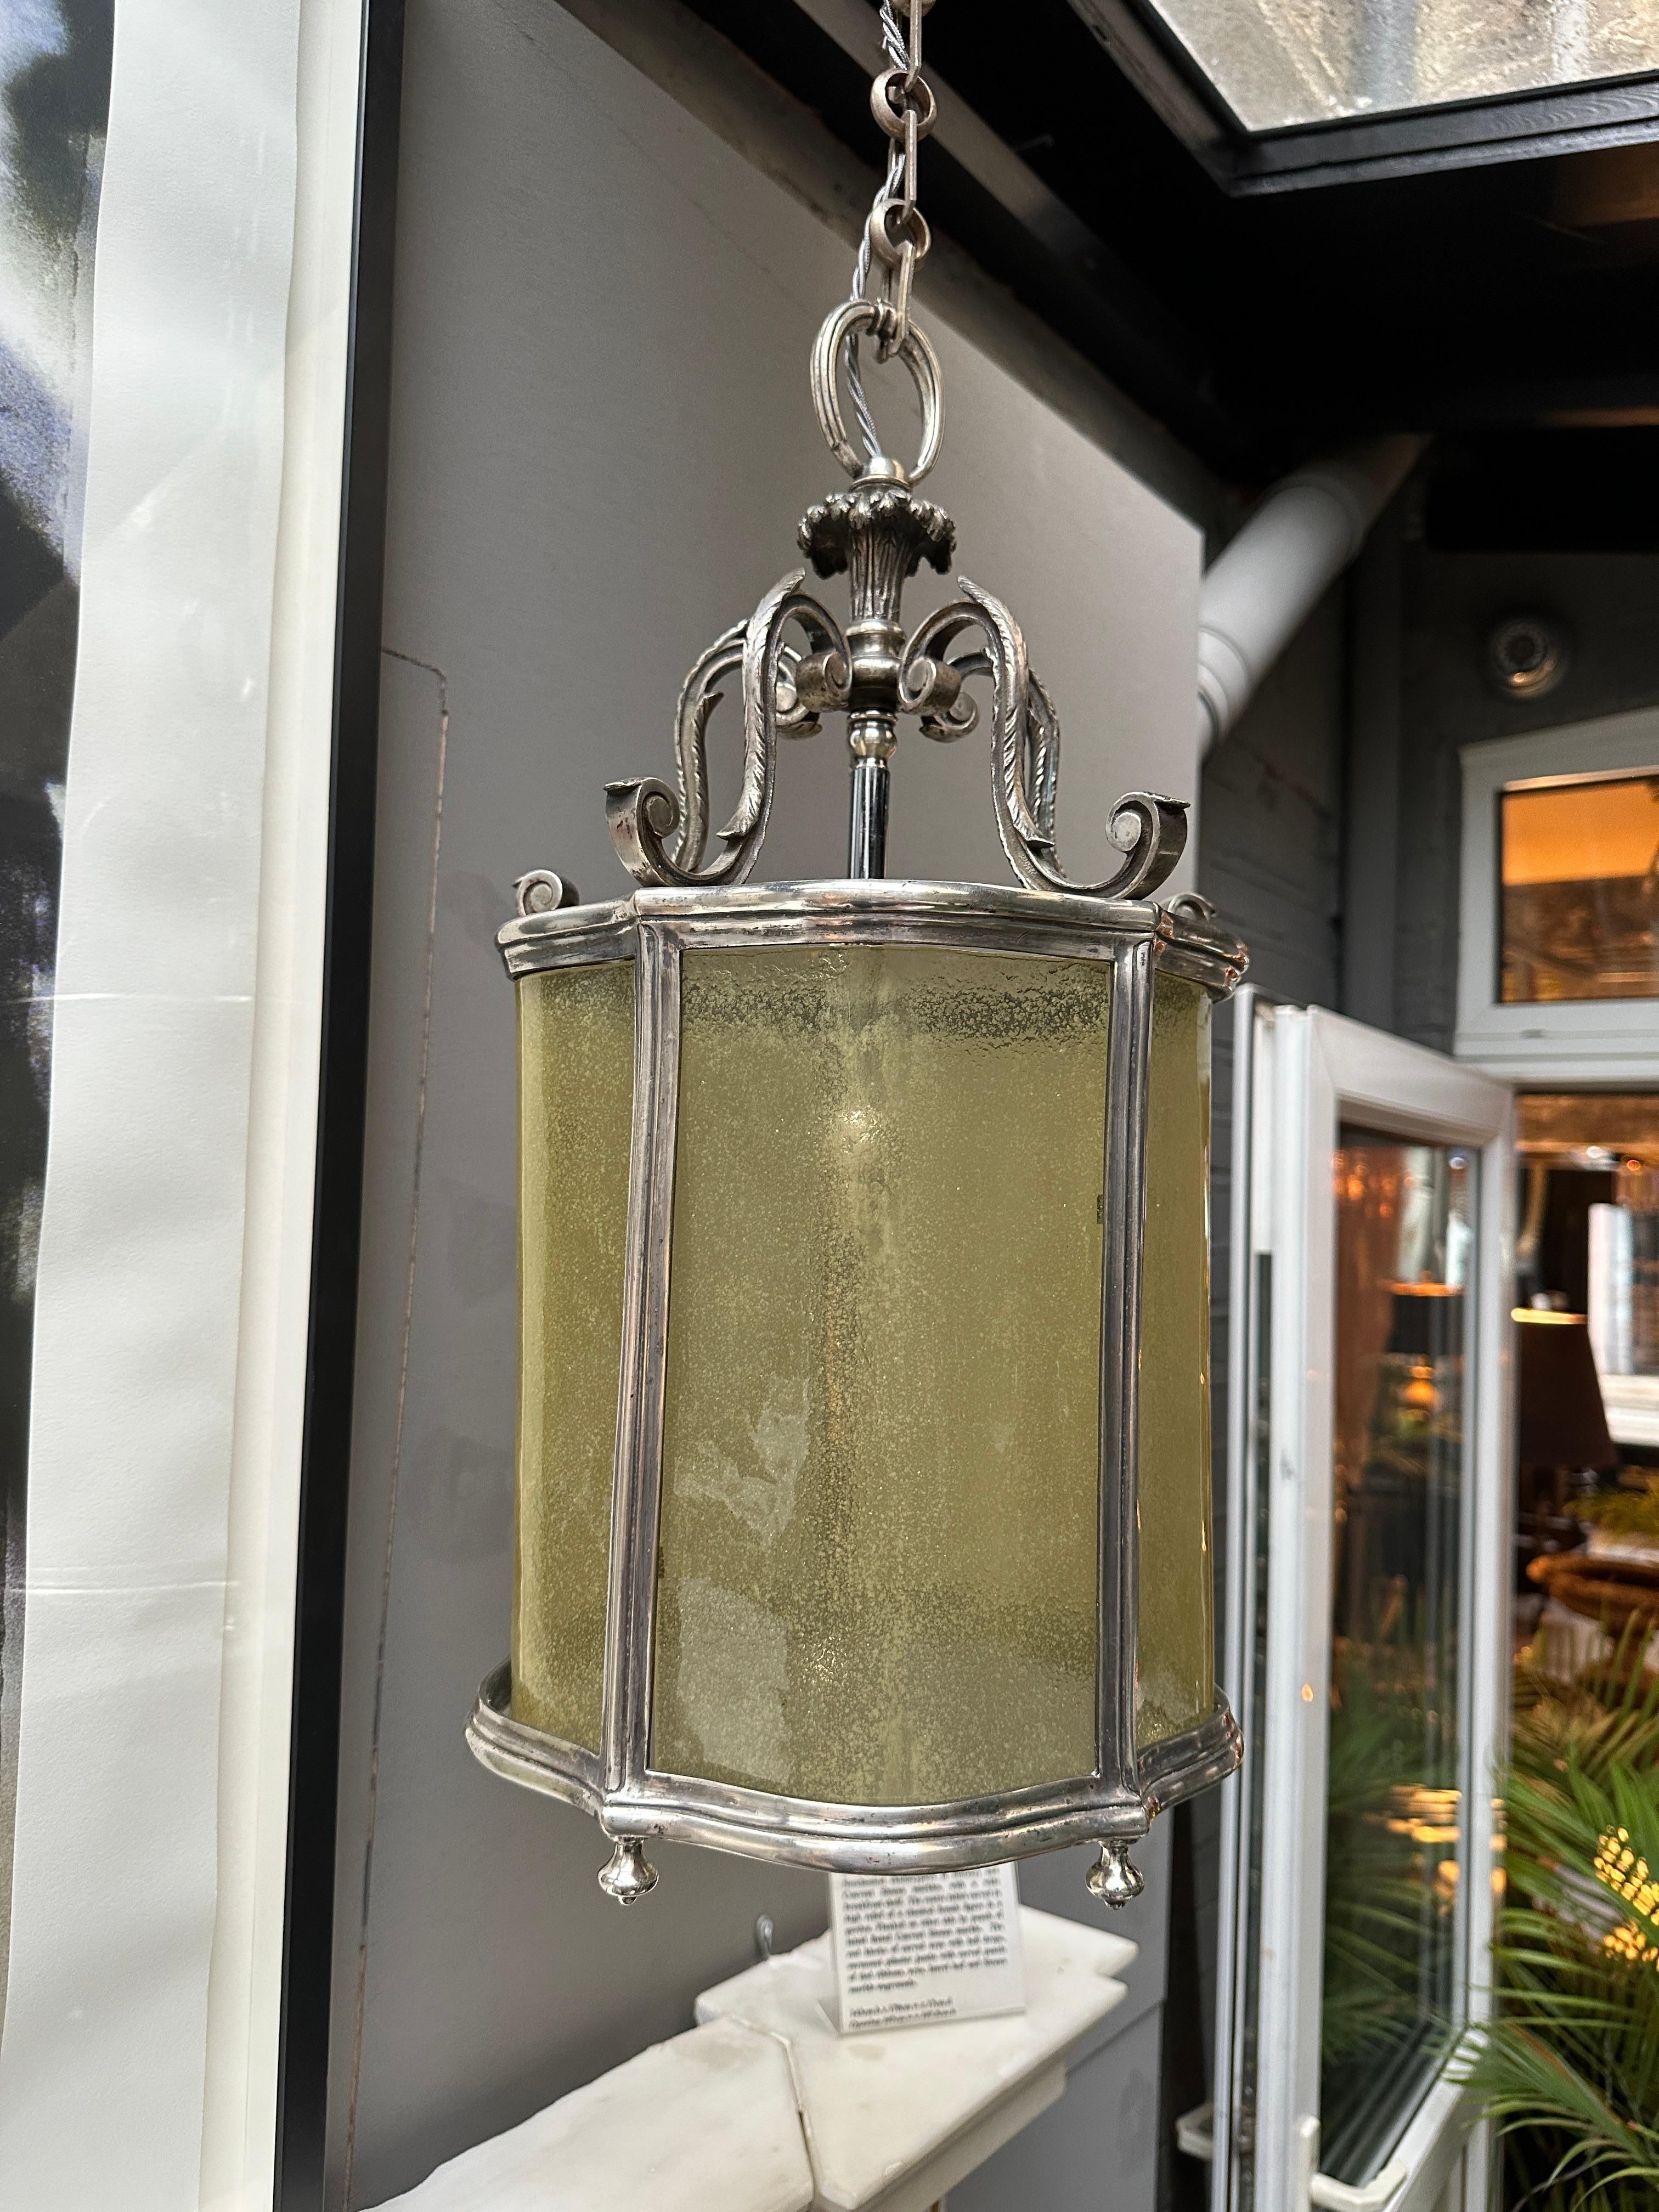 An Italian nickel and curved Murano amber glass lantern from the early 20th century. Very good quality casting and glass panels. The canopy with scrolled acanthus design. Finials to base. 45cm of adjustable chain included giving the overall drop of